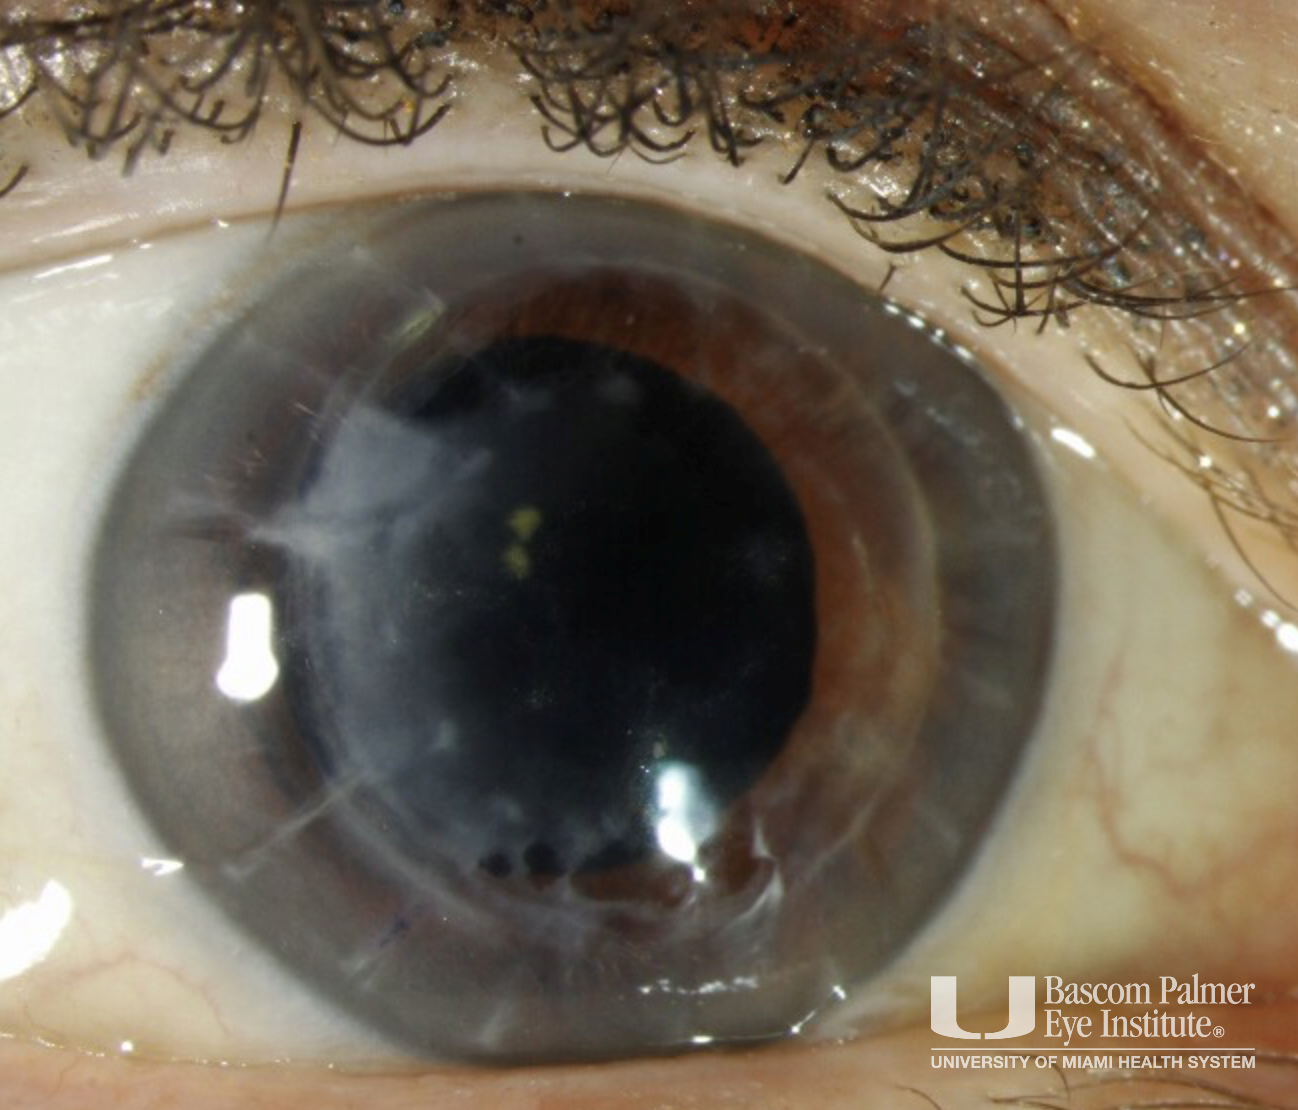 Acquired Corneal Subepithelial Hypertrophy (ACSH)